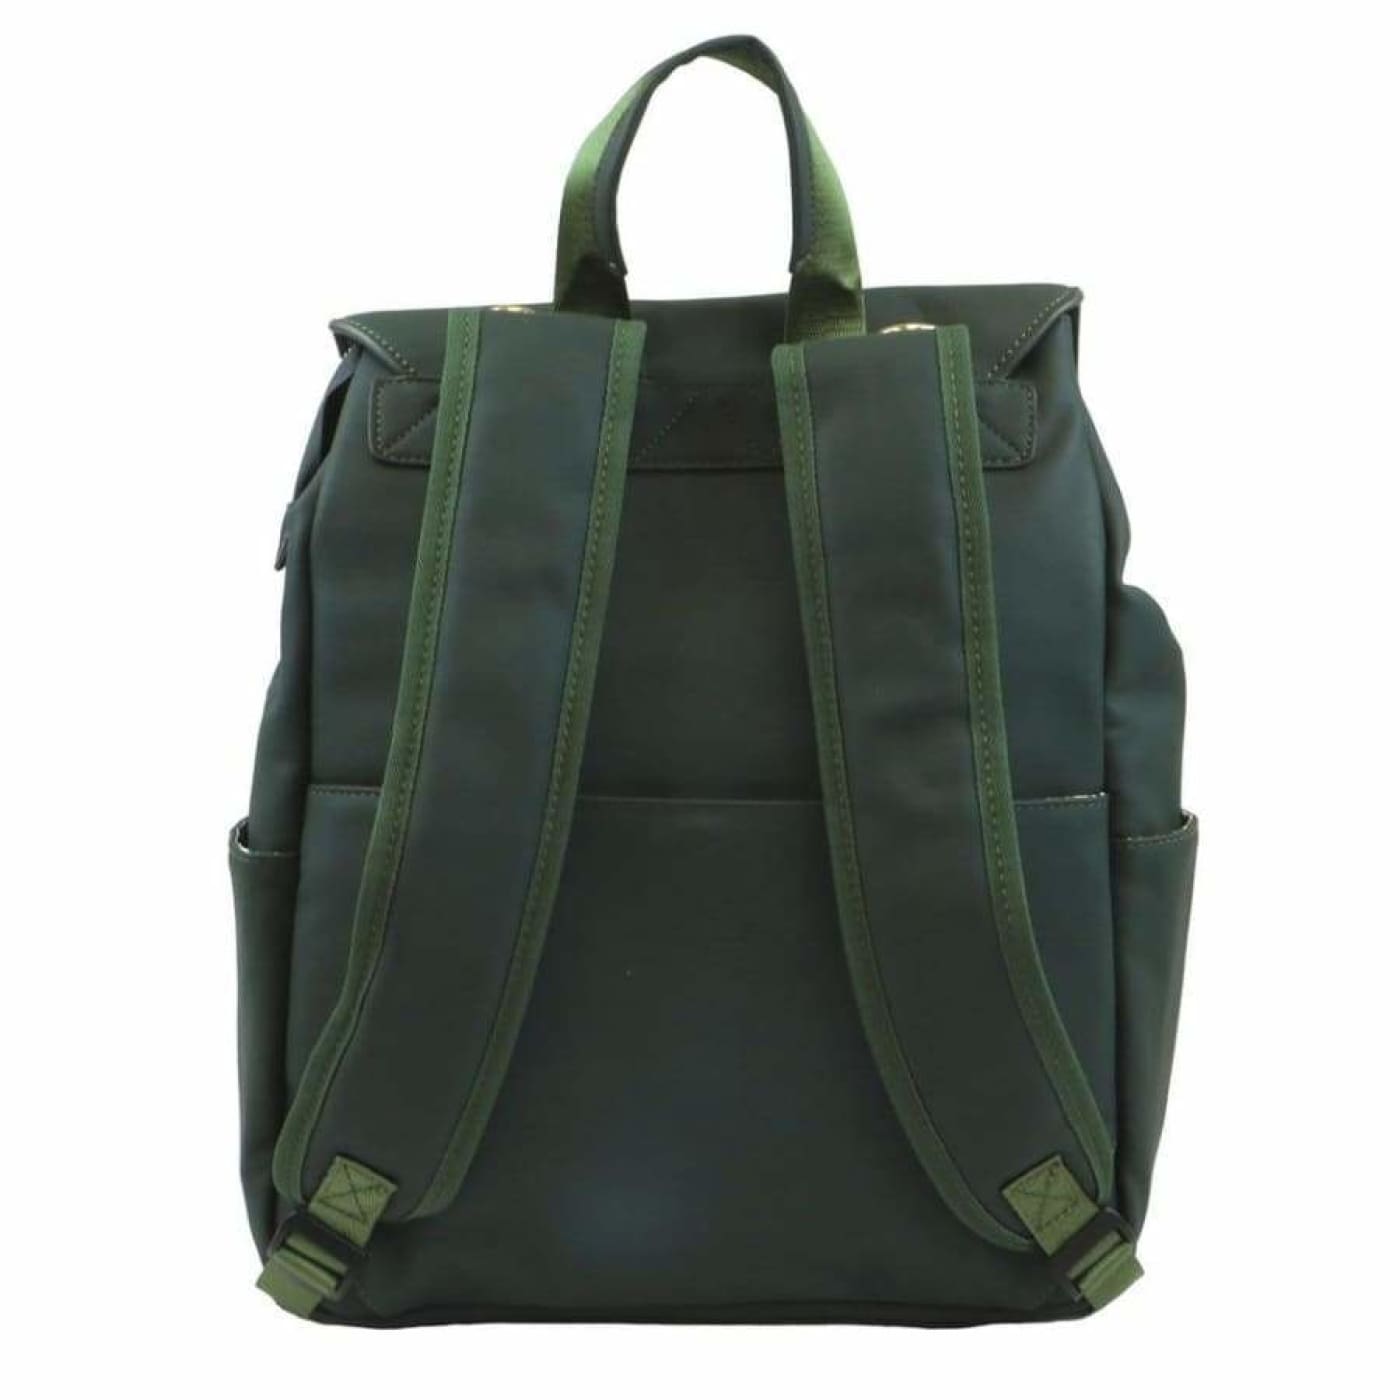 Isoki Hartley Backpack - Forest - Forest - ON THE GO - NAPPY BAGS/LUGGAGE